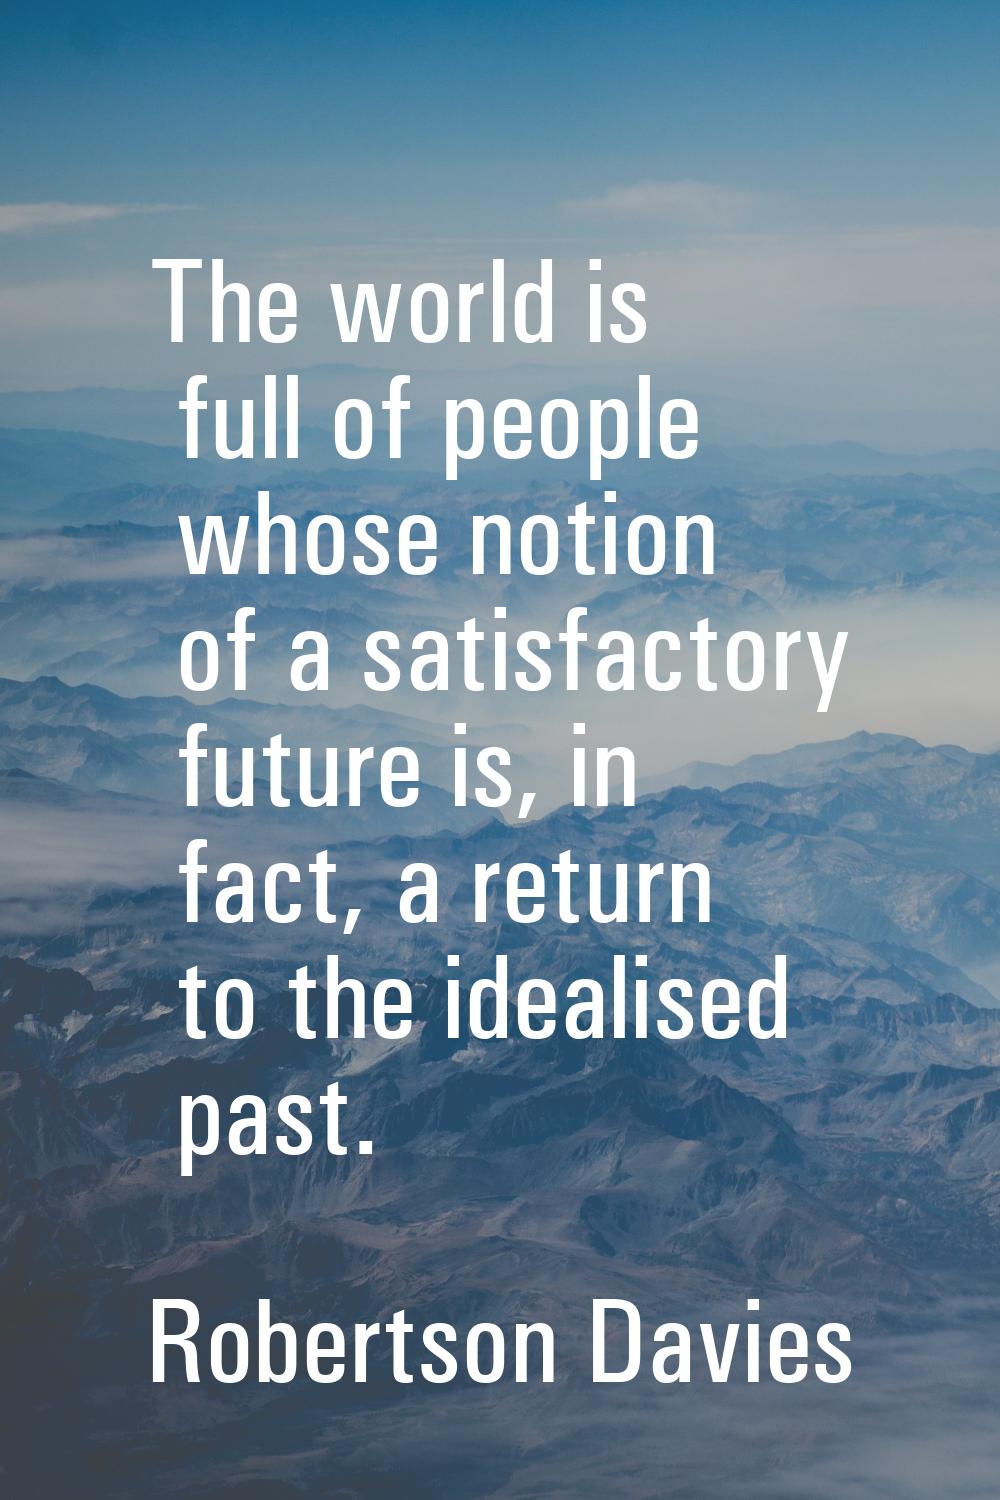 The world is full of people whose notion of a satisfactory future is, in fact, a return to the idea